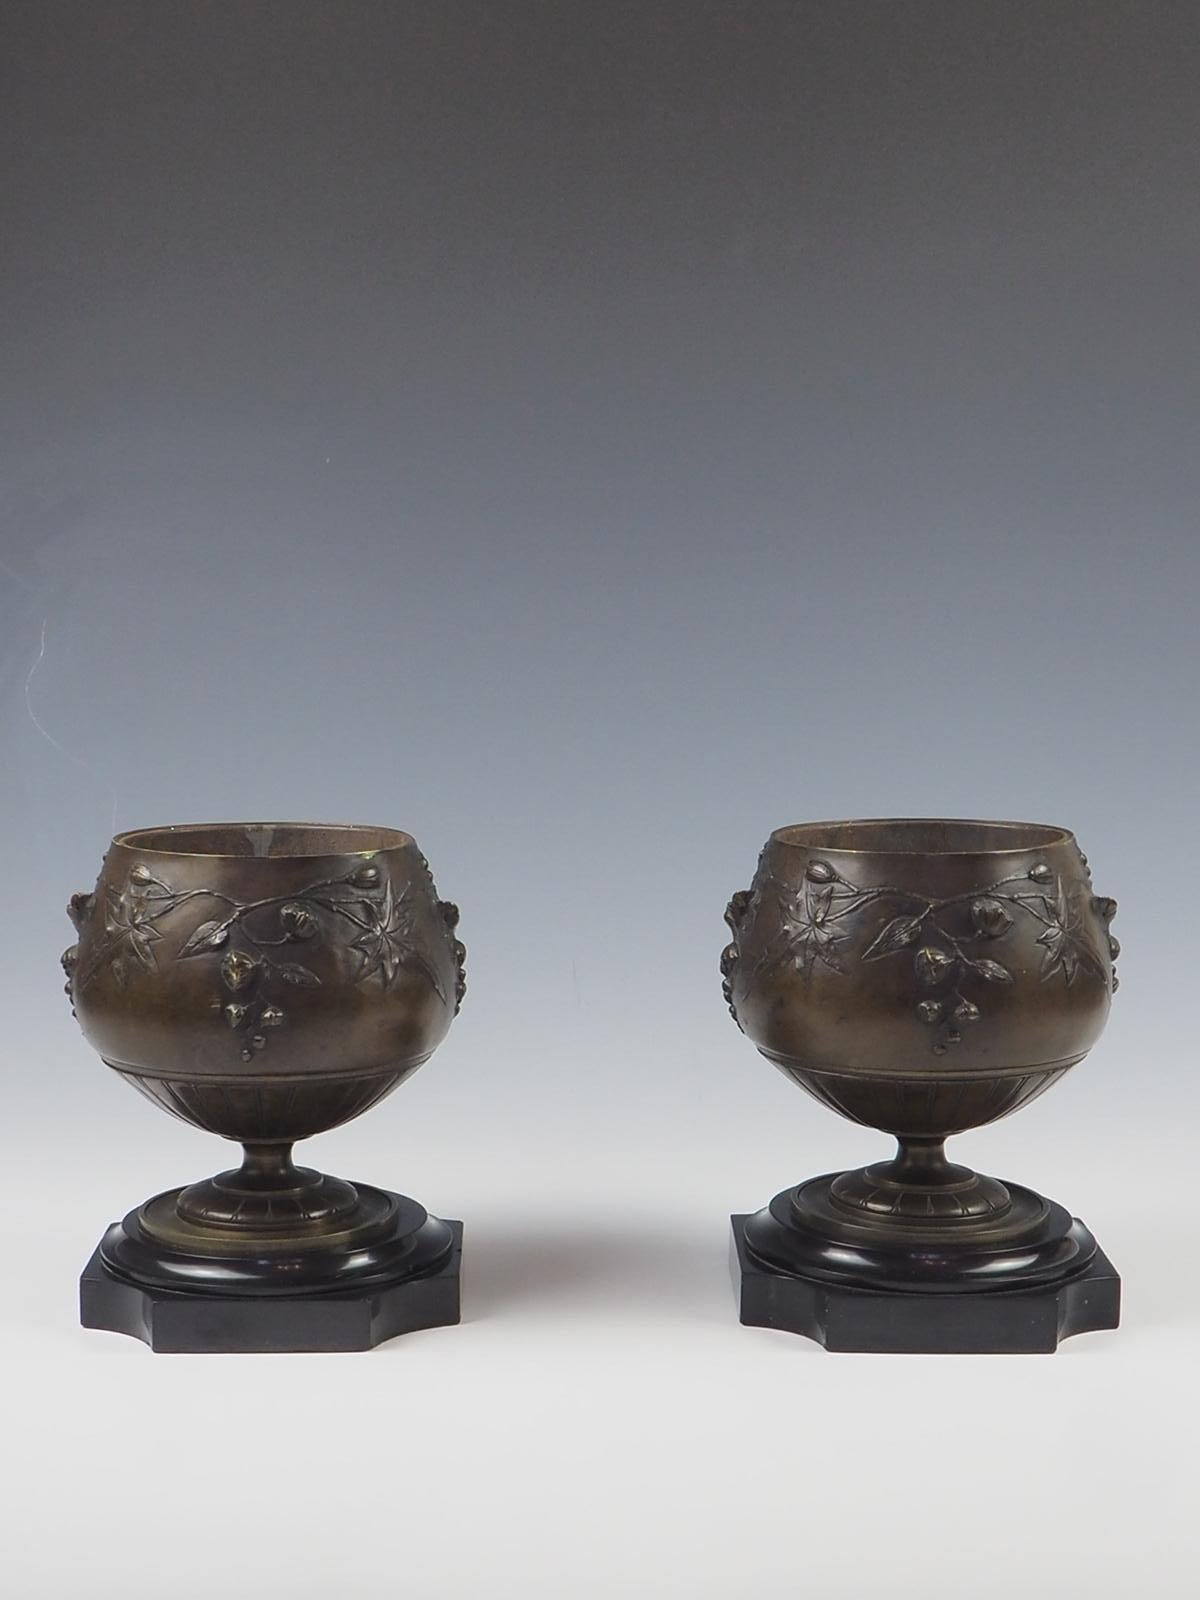 Pair of 19th Century Bronze and Marble Table Top Planters / Urns

Finely decorated with leaves and flowers on a stepped black marble base

Both planters have liners 

Measurement

Height:  18 cm   /  7.08  inches (each)

Width:  14 cm   /  5.51 